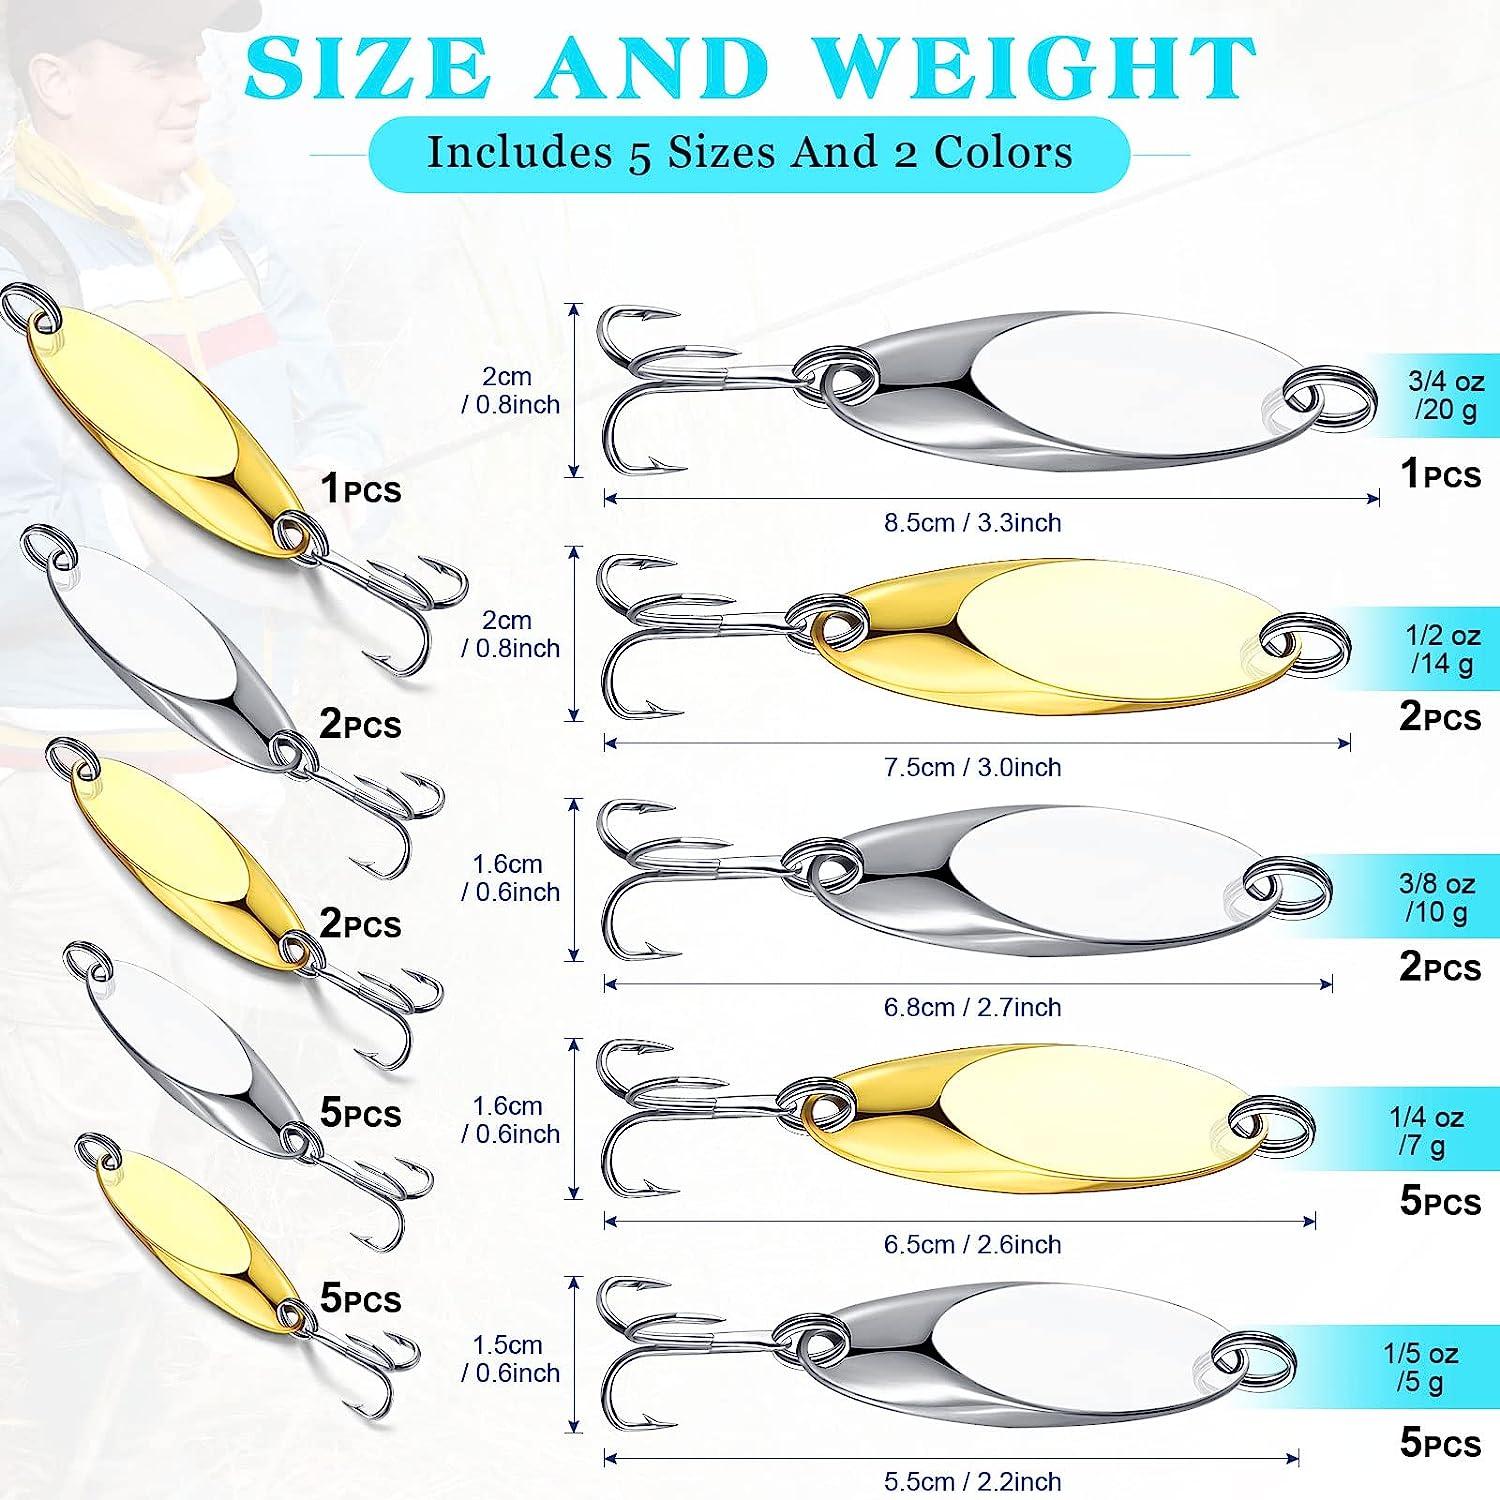 Elesunory 30 Pieces Fishing Spoons Lures, Fishing Spoons Hard Metal Spoon  Lures Spoons for Huge Distance Cast Saltwater Freshwater Fishing in 1/5 oz